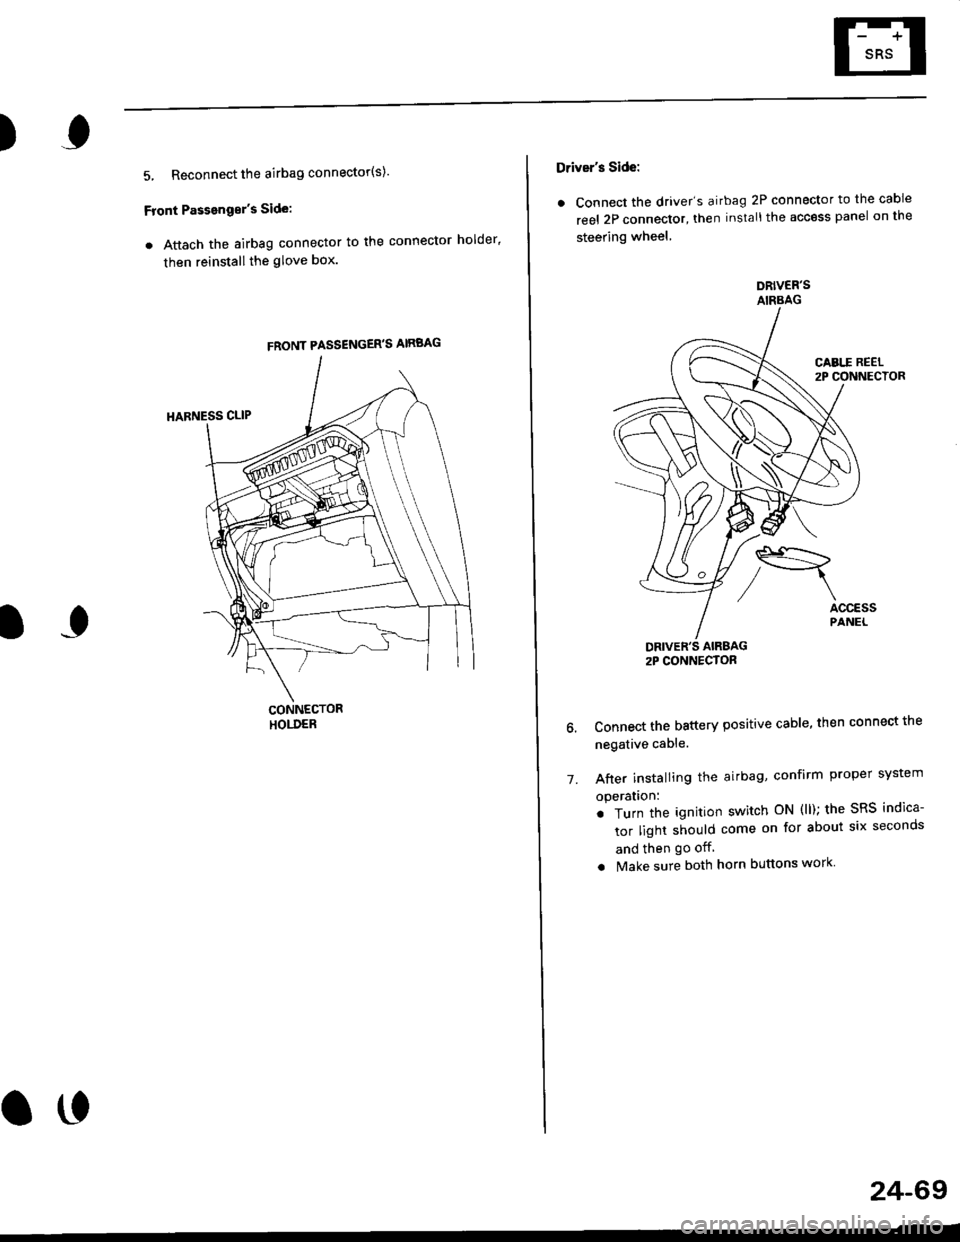 HONDA CIVIC 1998 6.G Workshop Manual )
5, Reconnect the airbag connector(s)
Front Passengors Side:
a Attach the airbag connector to the connector holder
then reinstallthe glove box.
FRONT PASSENGERS AIRBAG
oo
24-69
Drivers Side:
a C